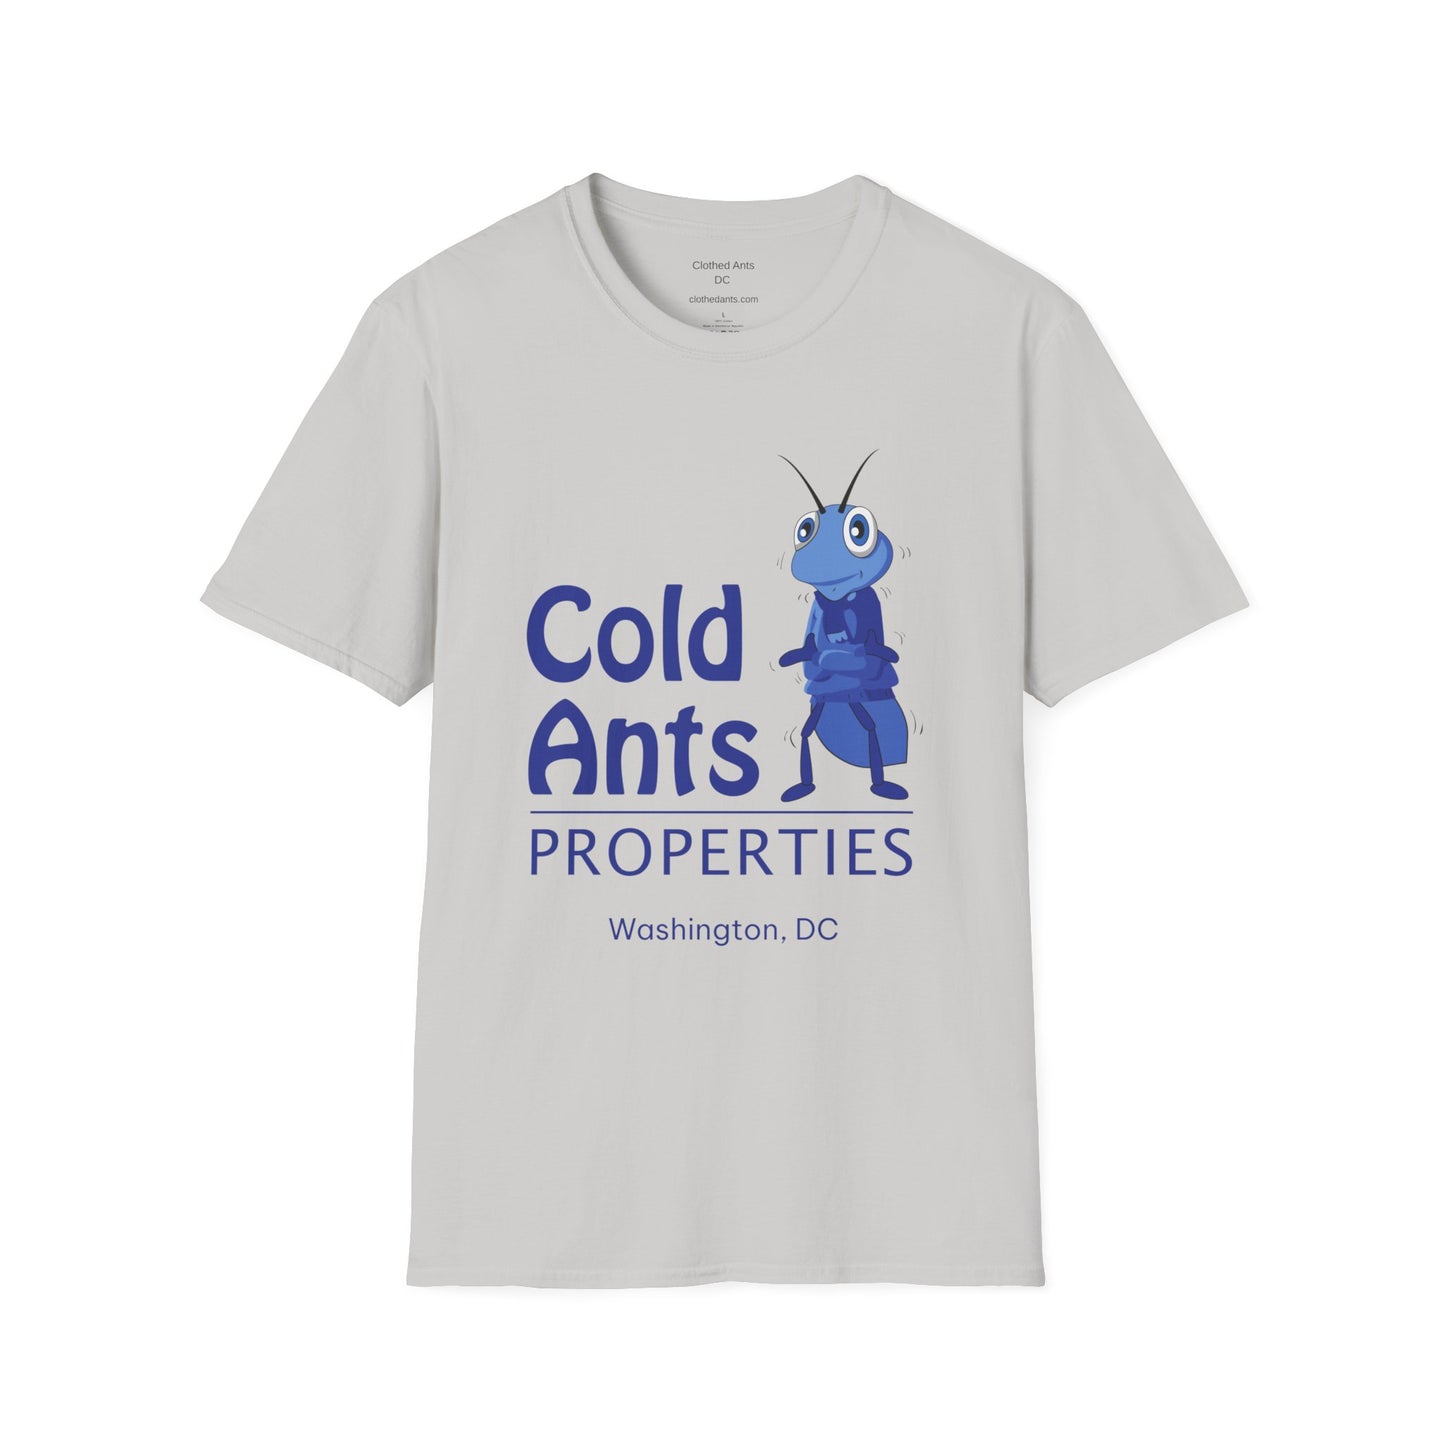 Cold Ants Properties - DC